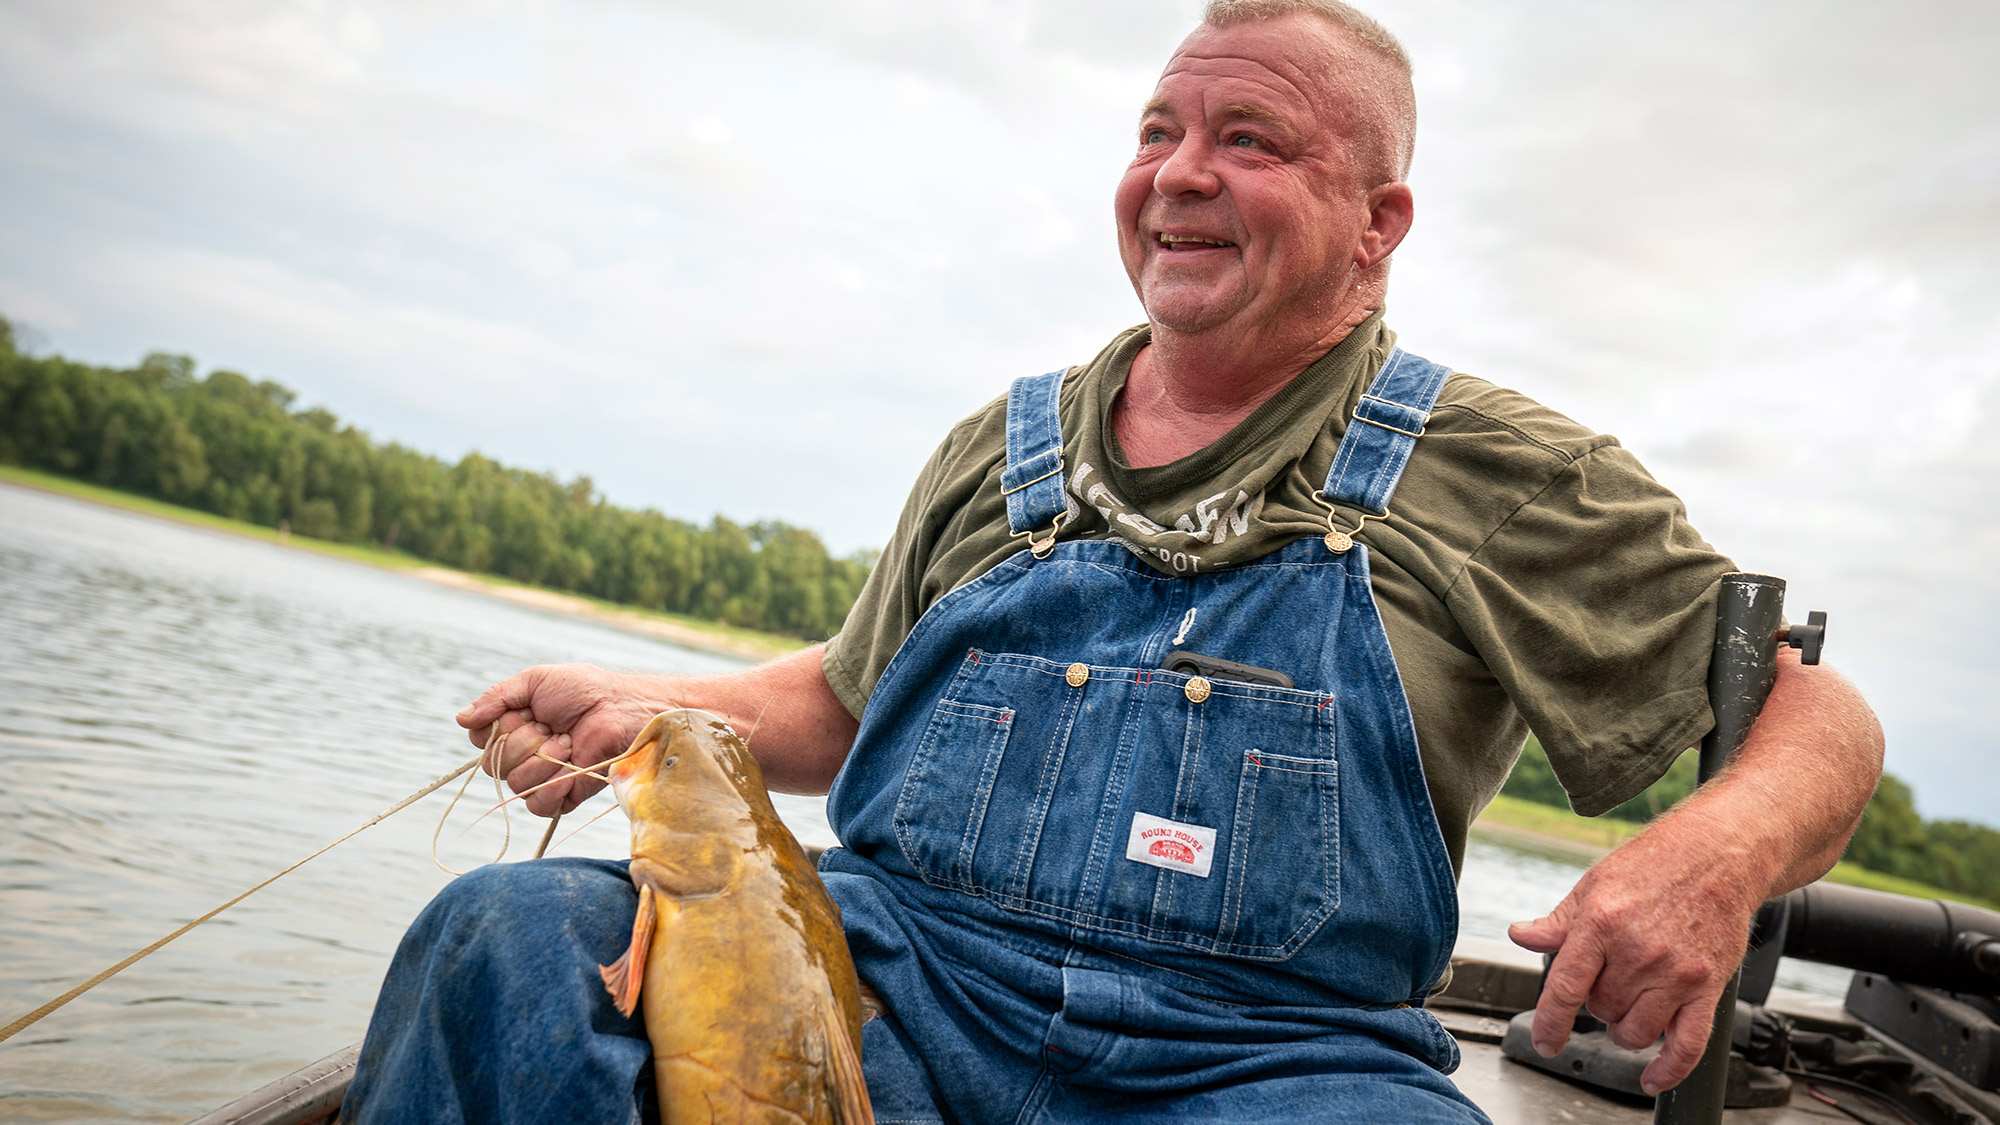 Trotliner holding a flathead catfish on his lap